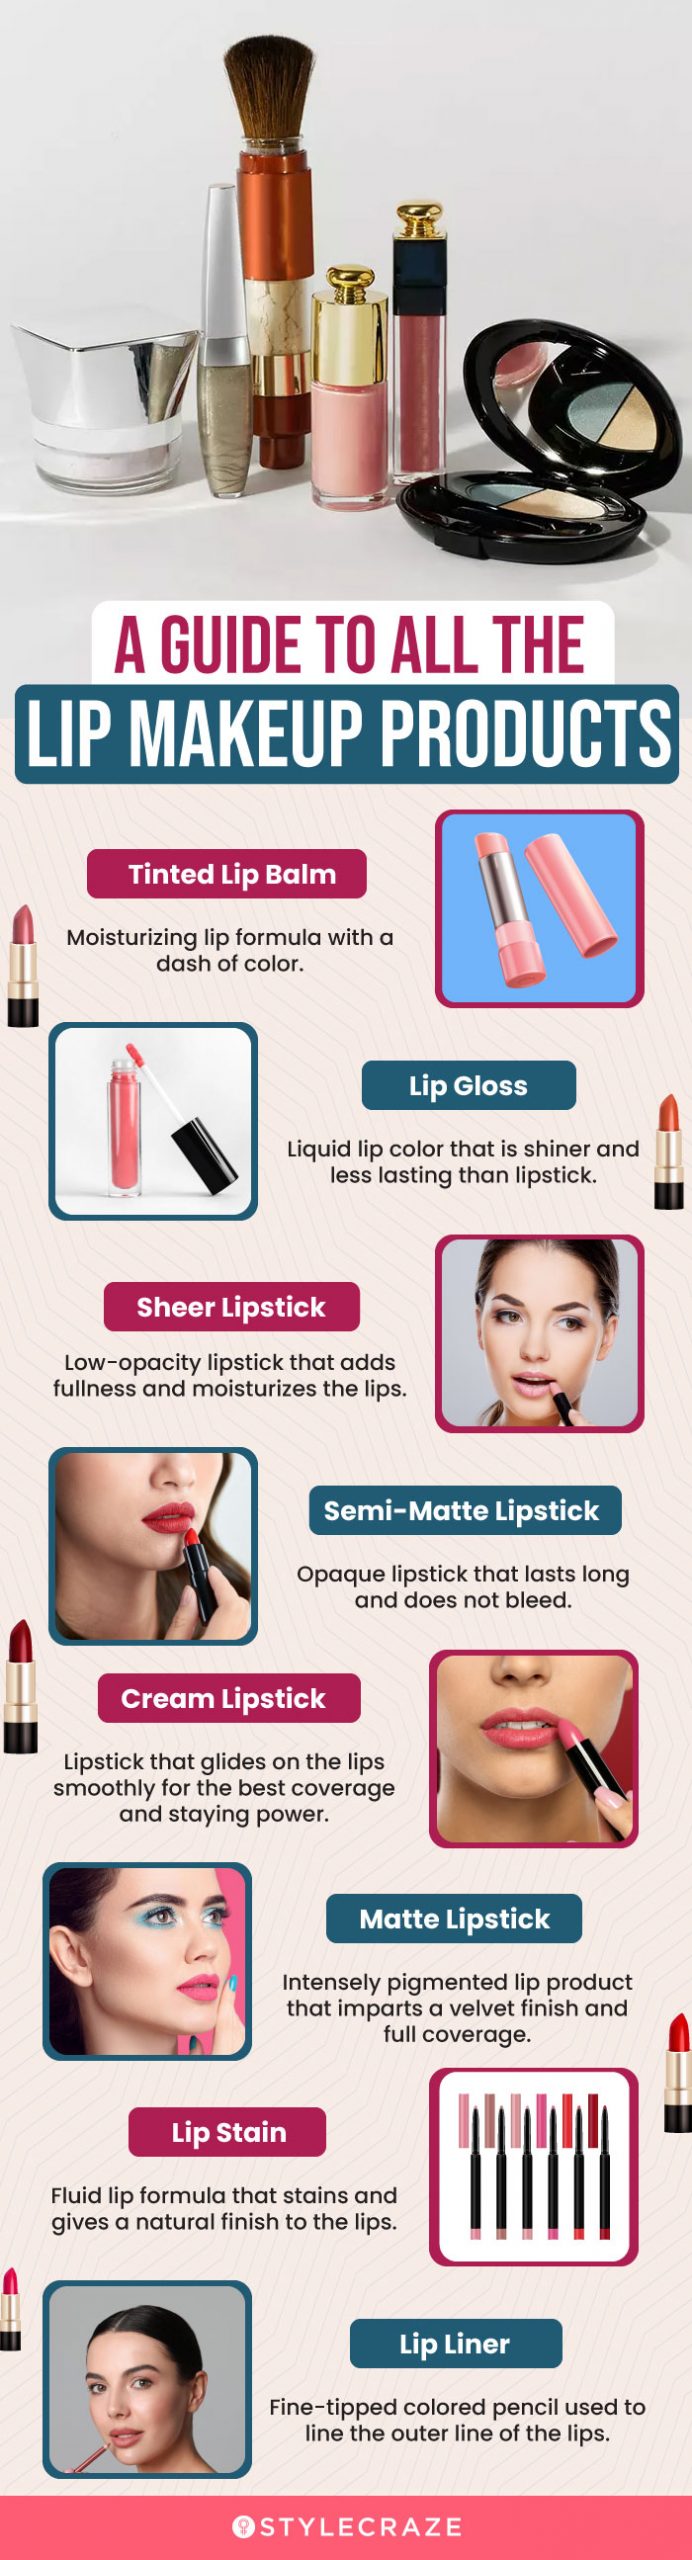 a guide to all the lip makeup products (infographic)